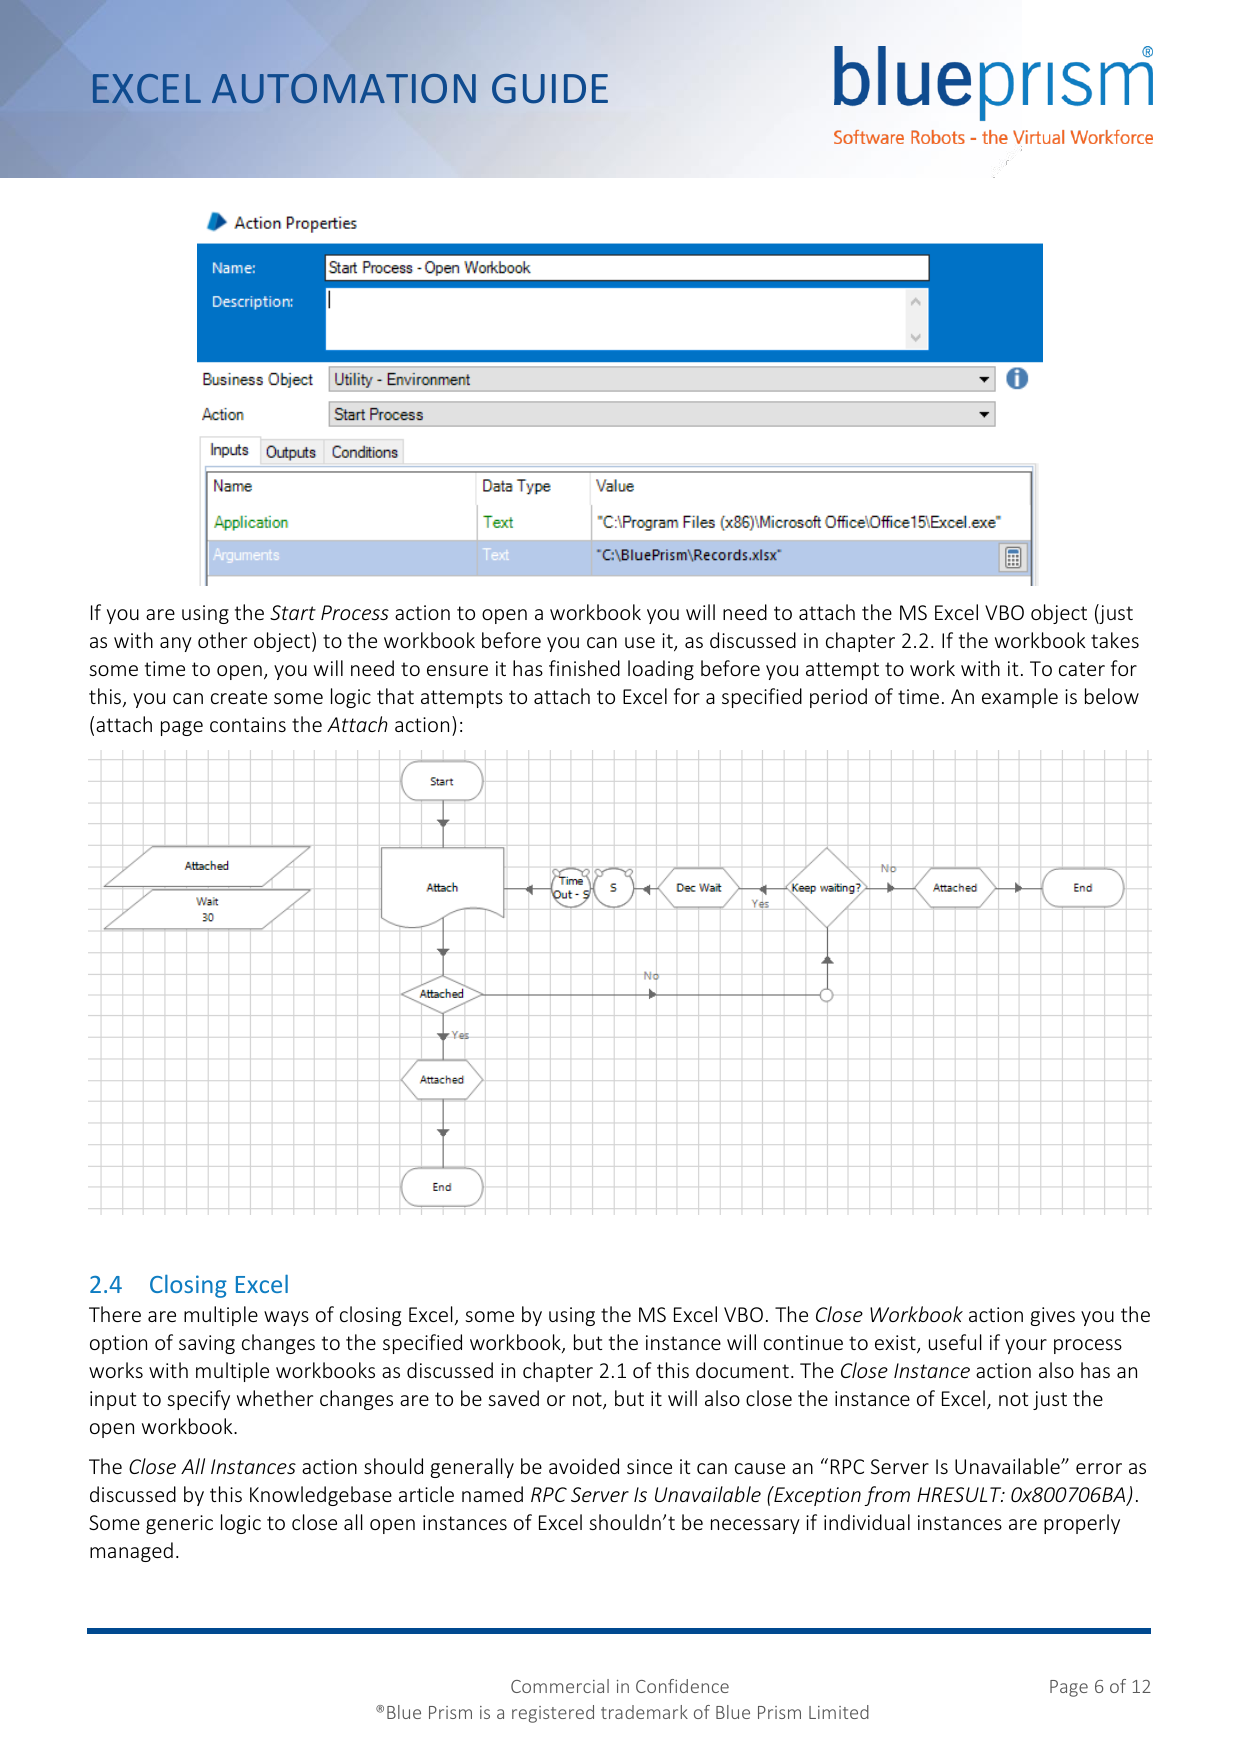 Page 6 of 12 - Blue Prism Excel Automation Guide